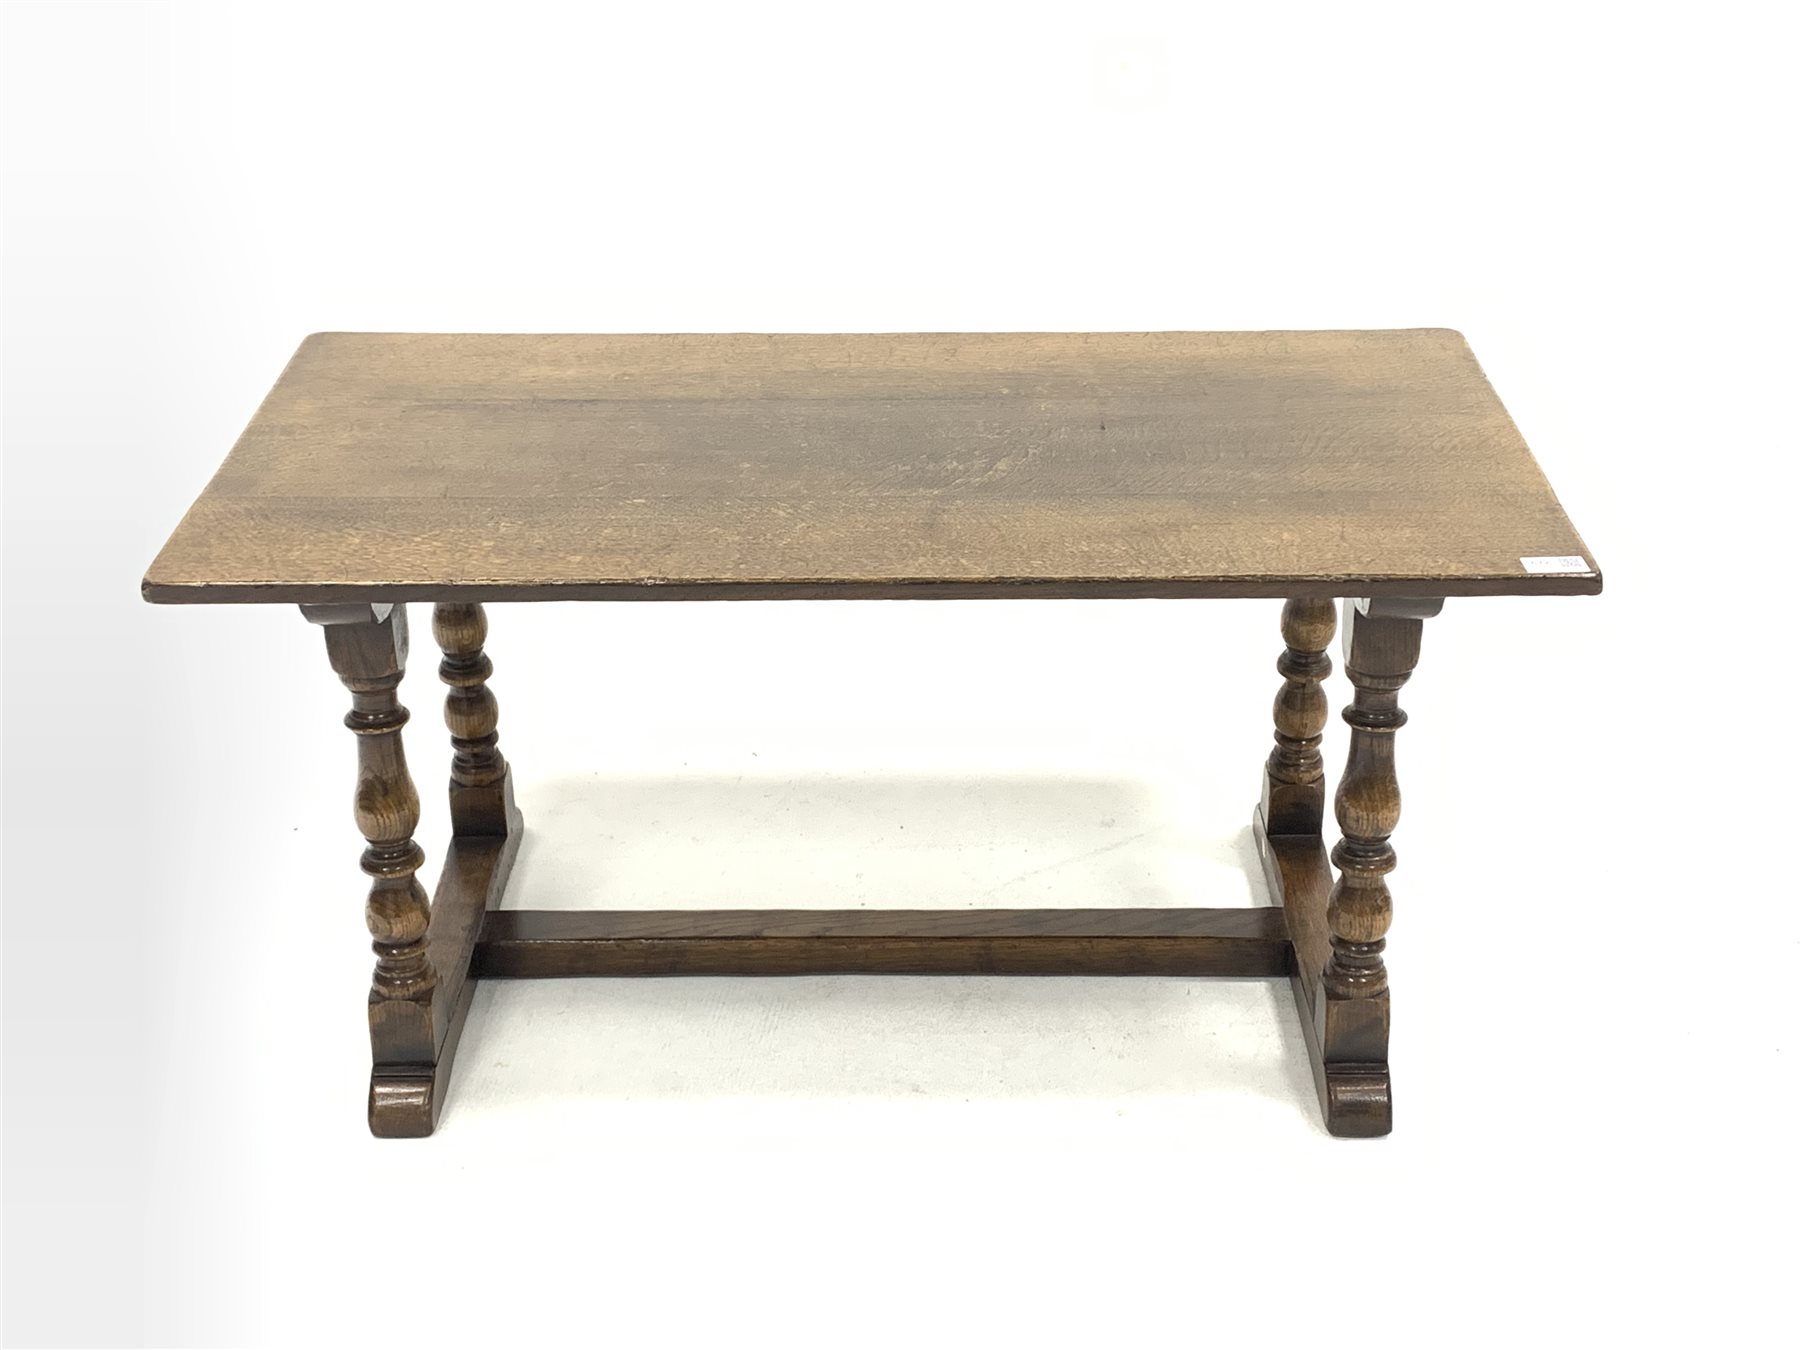 20th century solid oak coffee table - Image 2 of 2